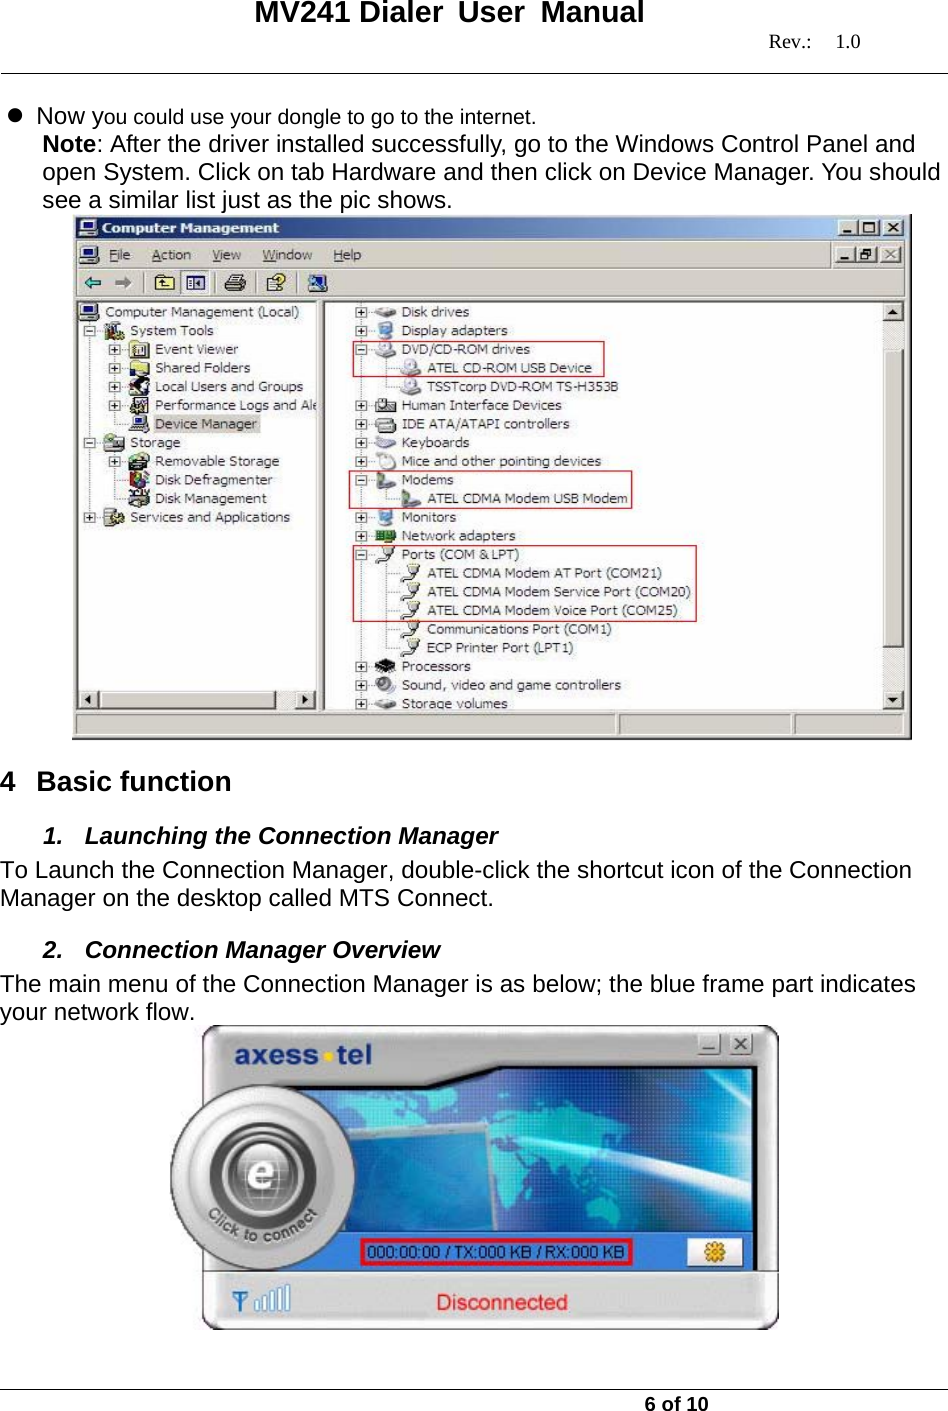   MV241 Dialer User Manual   Rev.: 1.0   6 of 10 z Now you could use your dongle to go to the internet. Note: After the driver installed successfully, go to the Windows Control Panel and open System. Click on tab Hardware and then click on Device Manager. You should see a similar list just as the pic shows.  4 Basic function 1.  Launching the Connection Manager To Launch the Connection Manager, double-click the shortcut icon of the Connection Manager on the desktop called MTS Connect. 2. Connection Manager Overview The main menu of the Connection Manager is as below; the blue frame part indicates your network flow.  